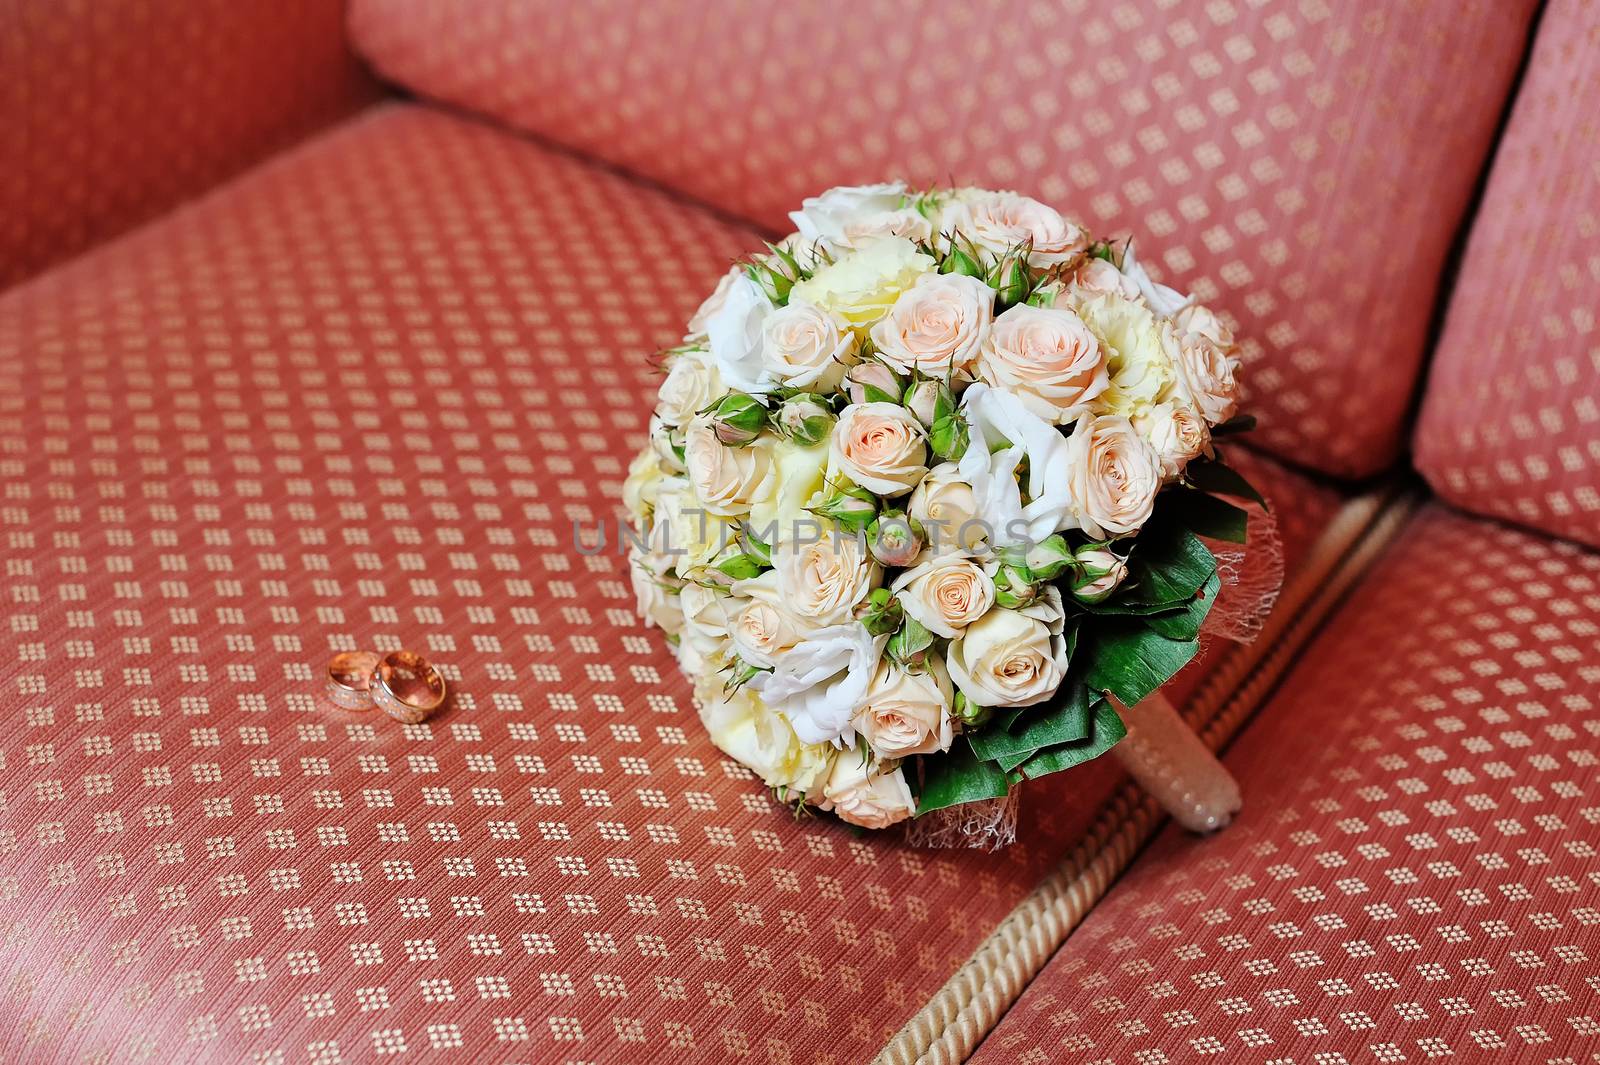 Pair of wedding rings and wedding bouquet on sofa.